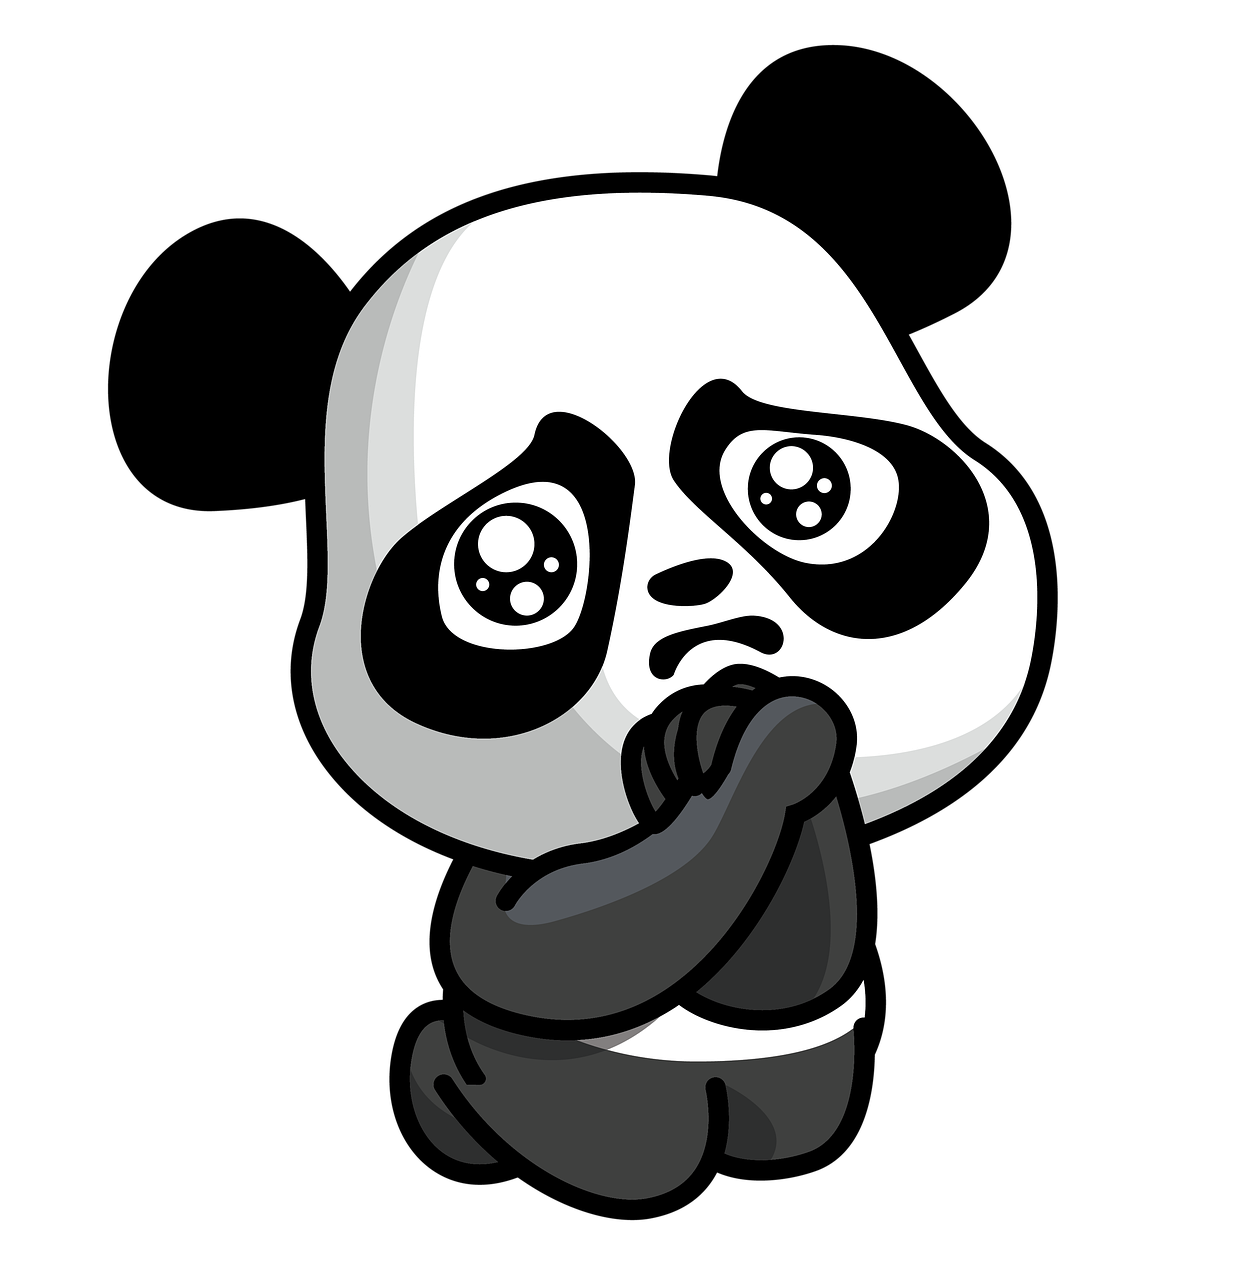 a black and white image of a panda bear, a digital painting, reddit, sad emoji, cartoonish vector style, q posket, hand over mouth